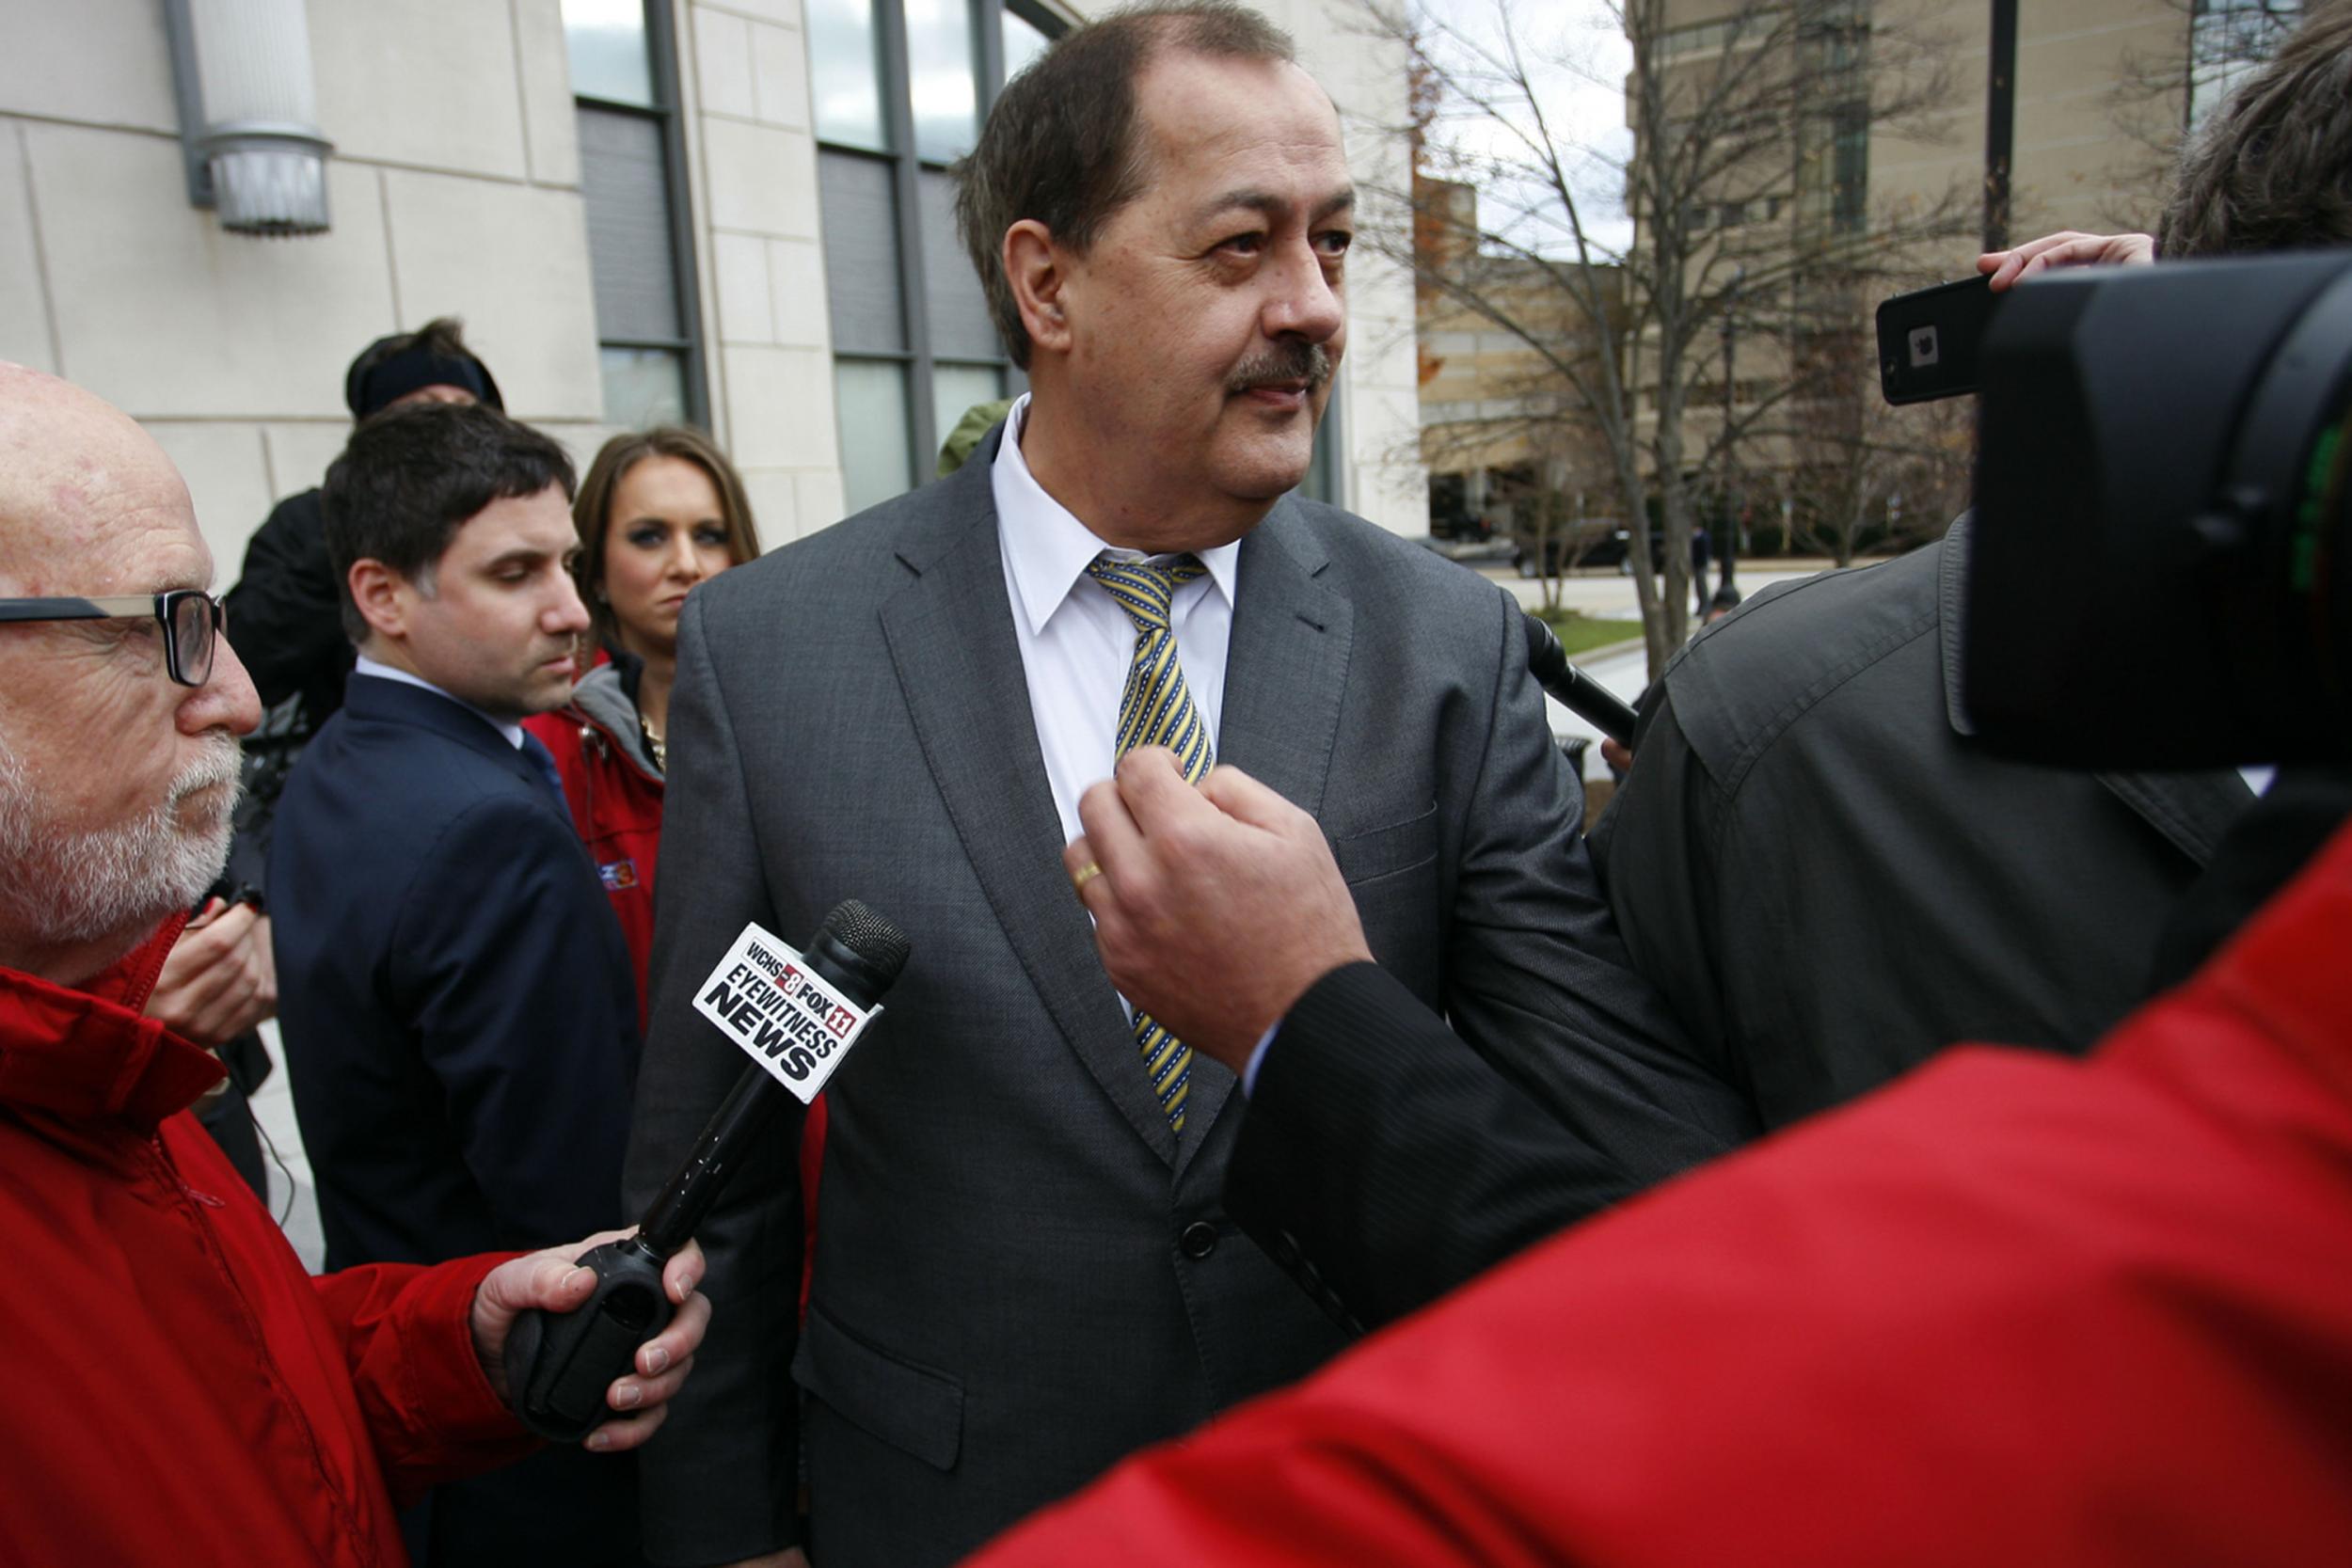 Mr Blankenship was also fined $250,000